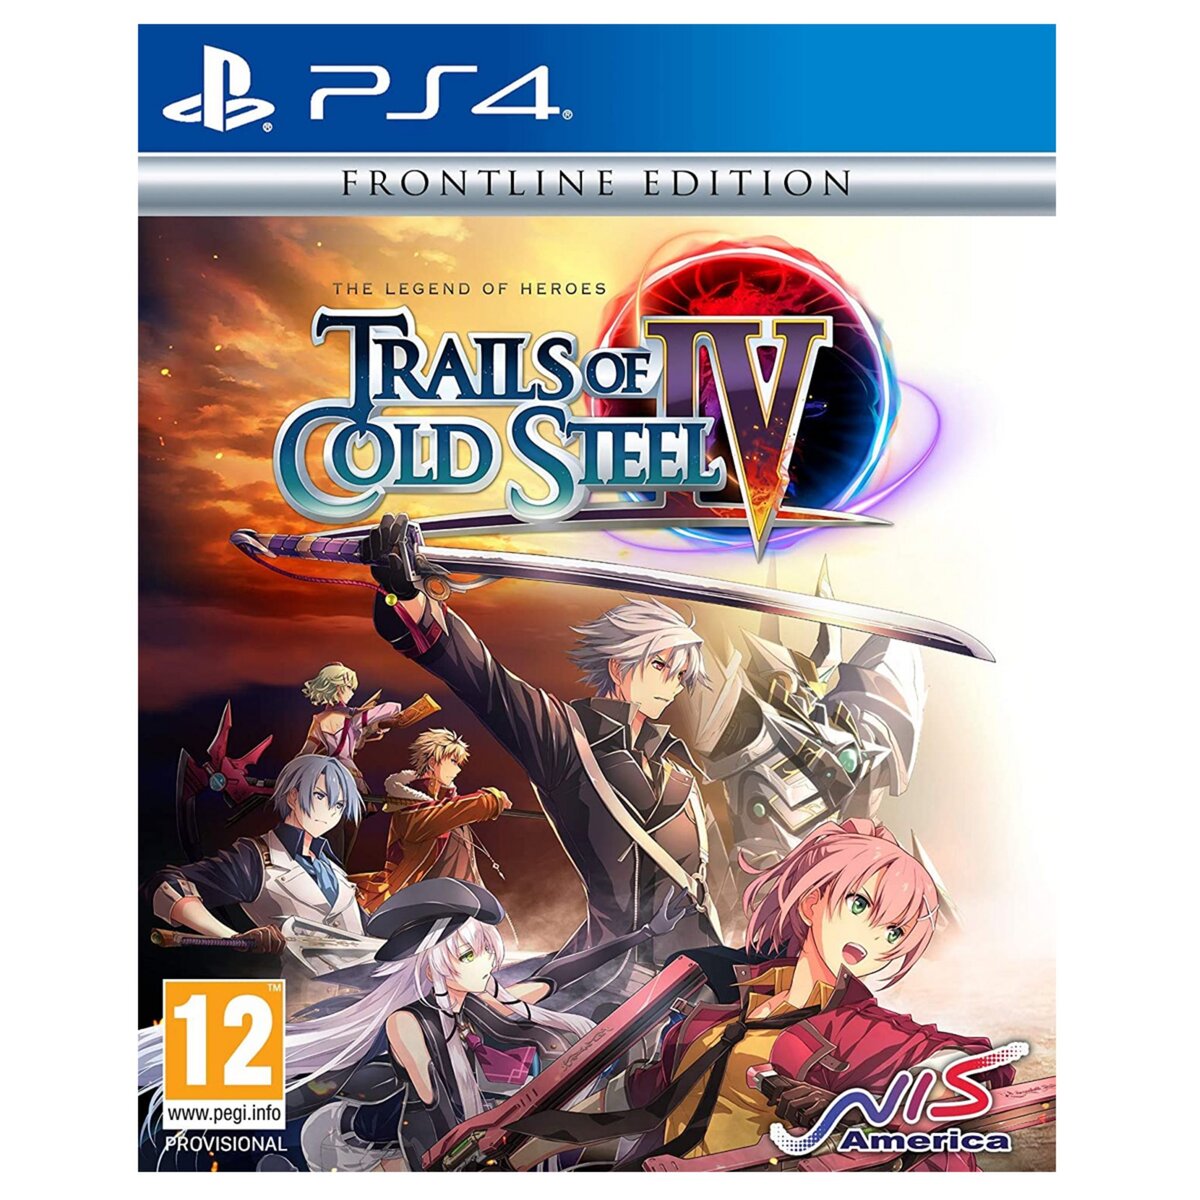 The Legend of Heroes Trails of Cold Steel IV PS4